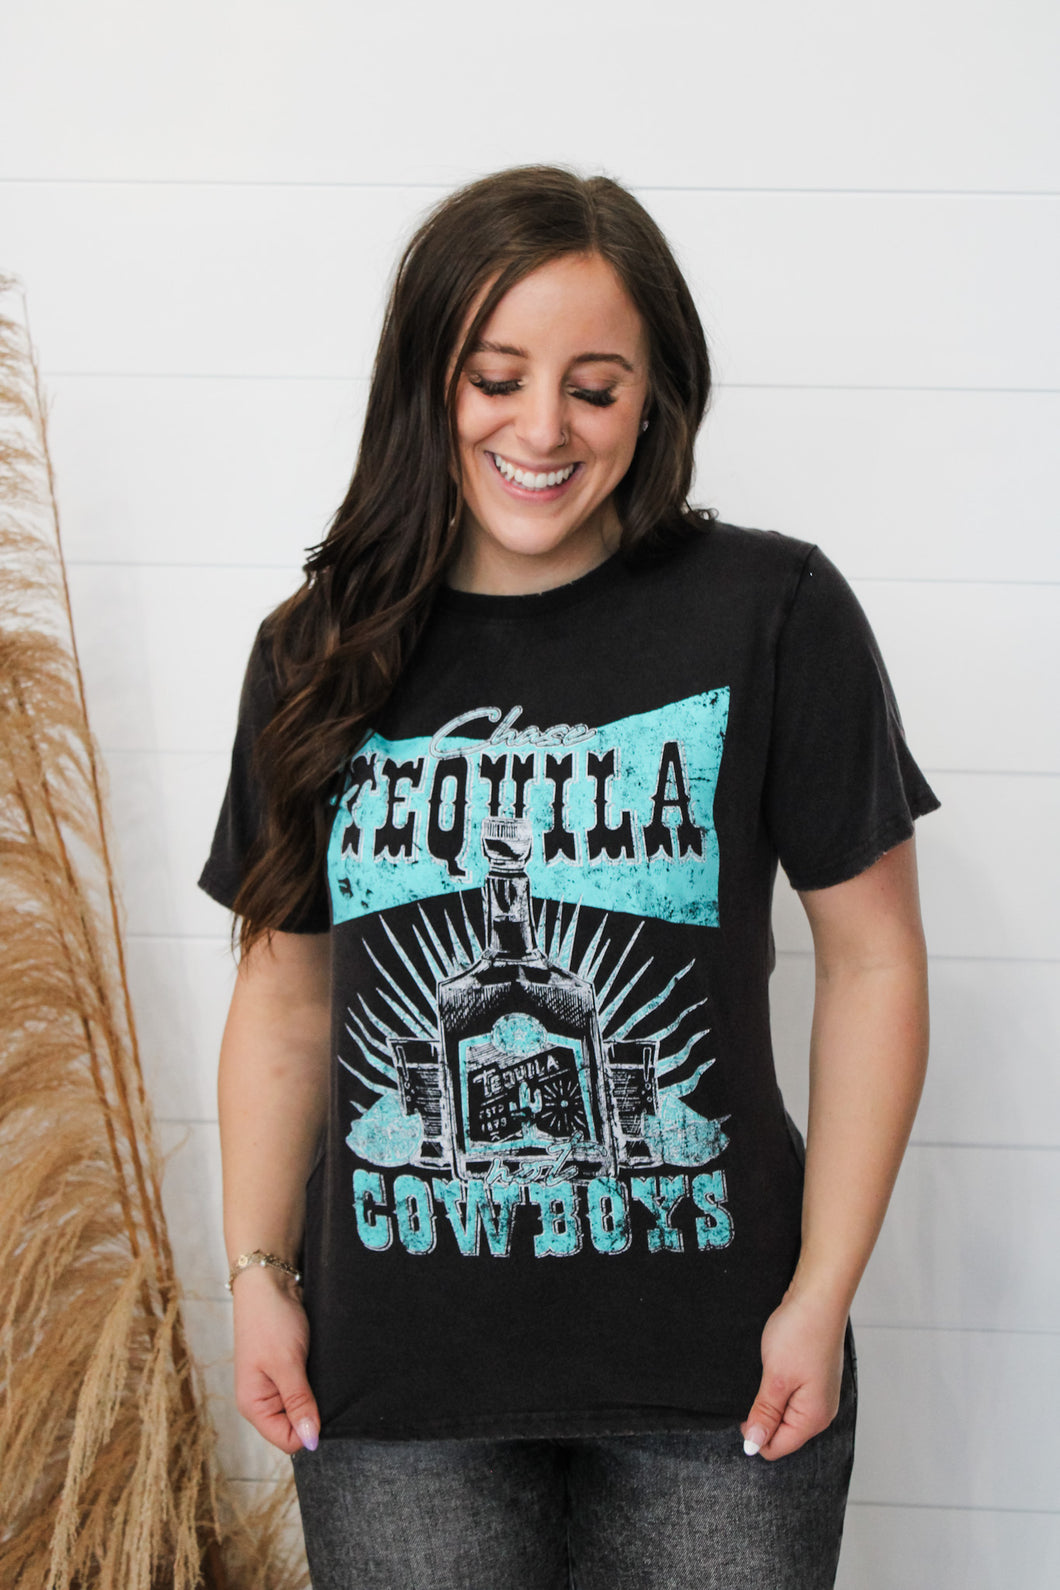 Tequila Cowboys Top